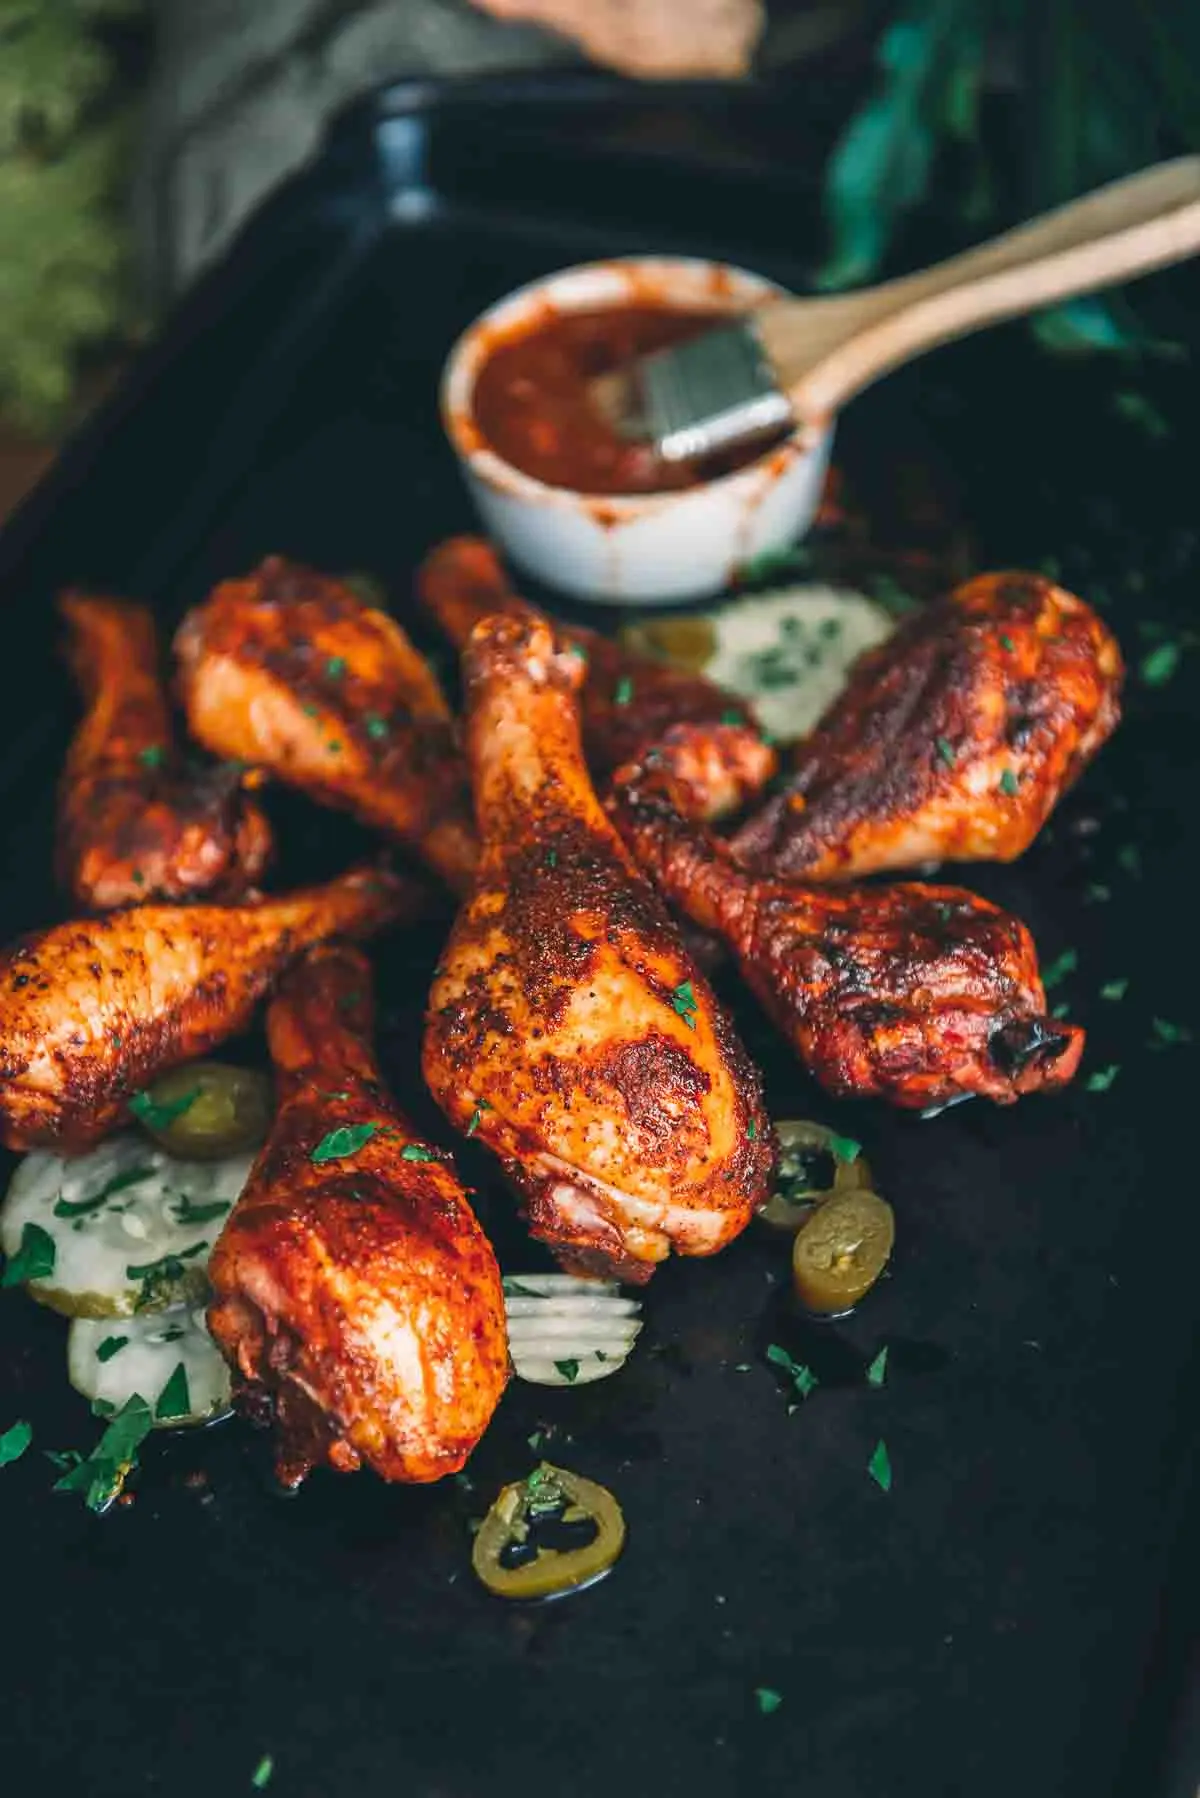 smoked chicken drumsticks - How do you smoke chicken without drying it out